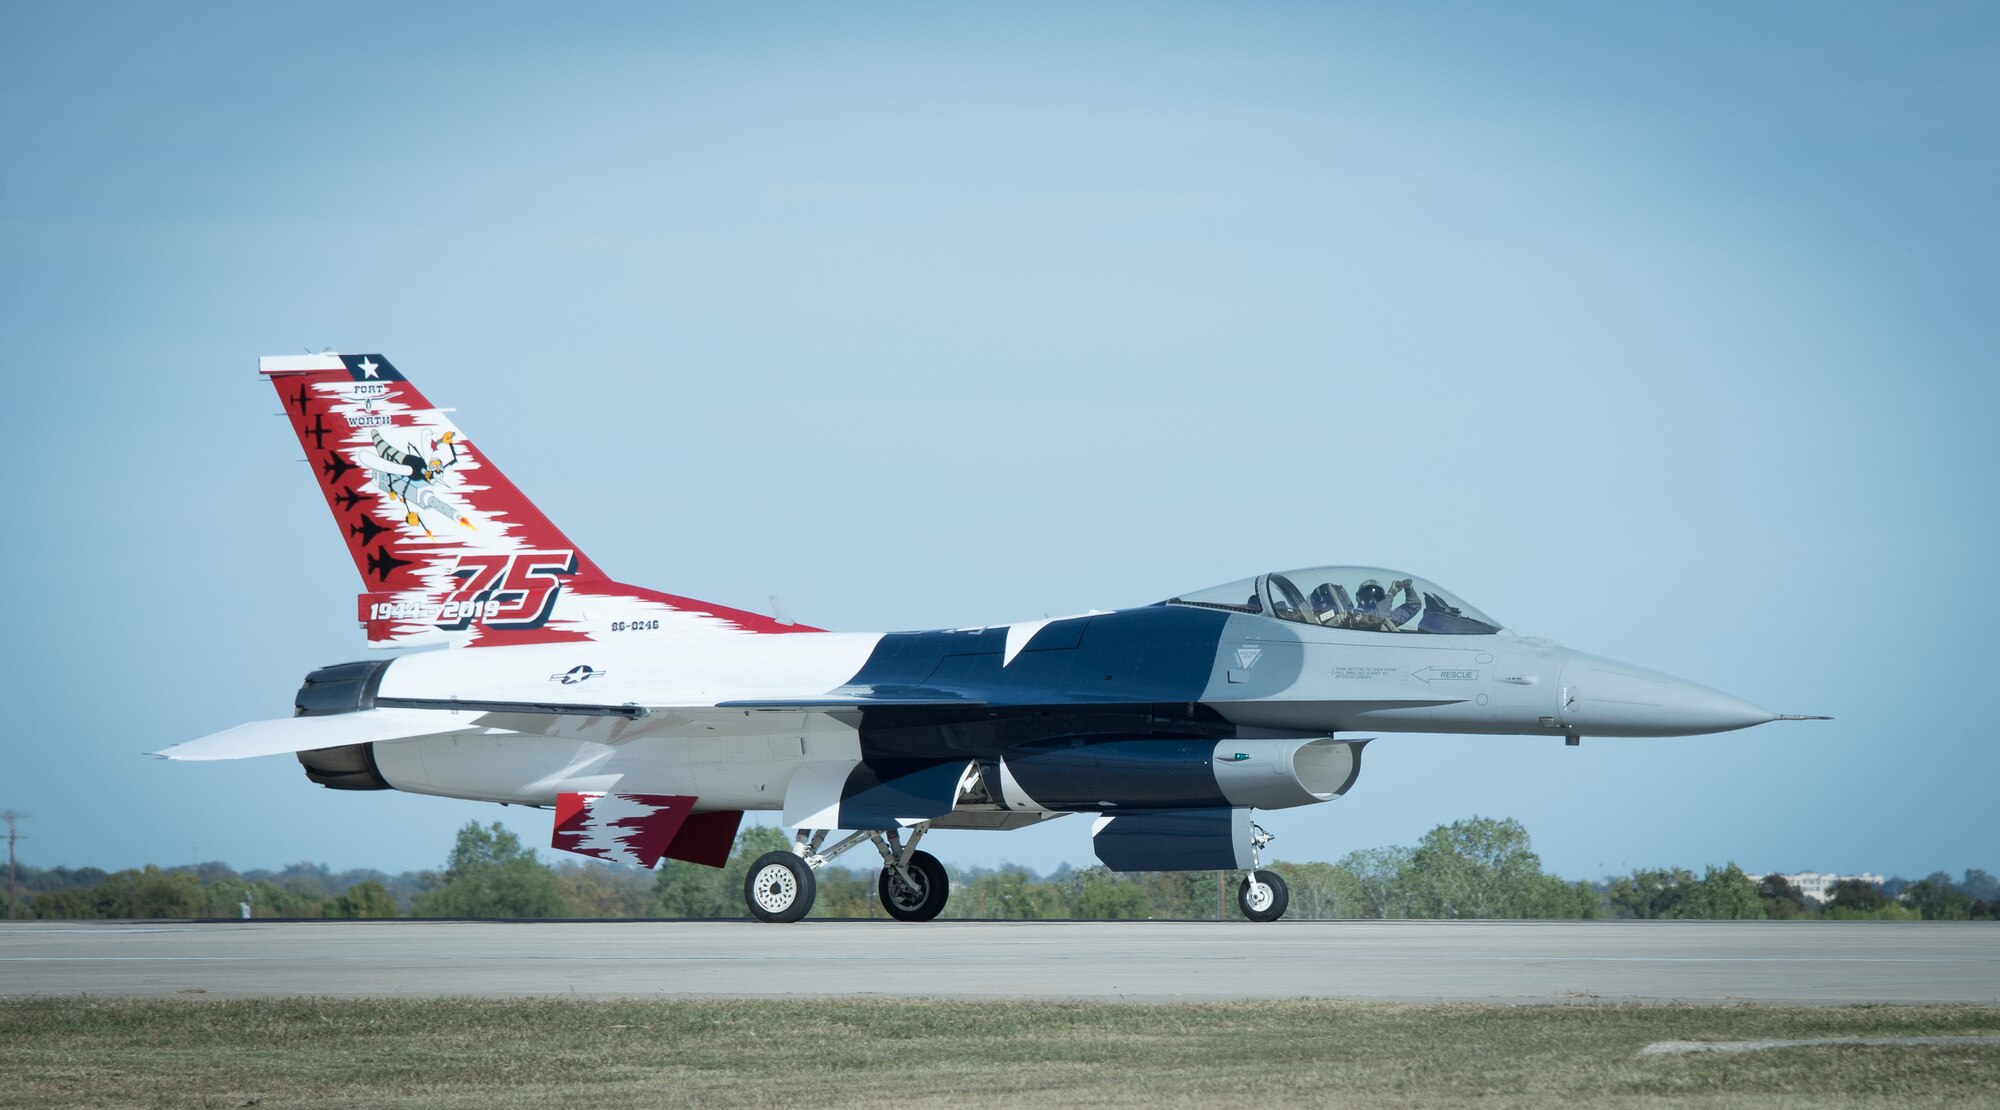 This F-16 arrives fully dressed to U.S. Naval Air Station Joint Reserve Base Fort Worth, Texas on November 4, 2020. The Texas tribute is in appreciation for the support of the community and state. (U.S. Air Force photo by Jeremy Roman)